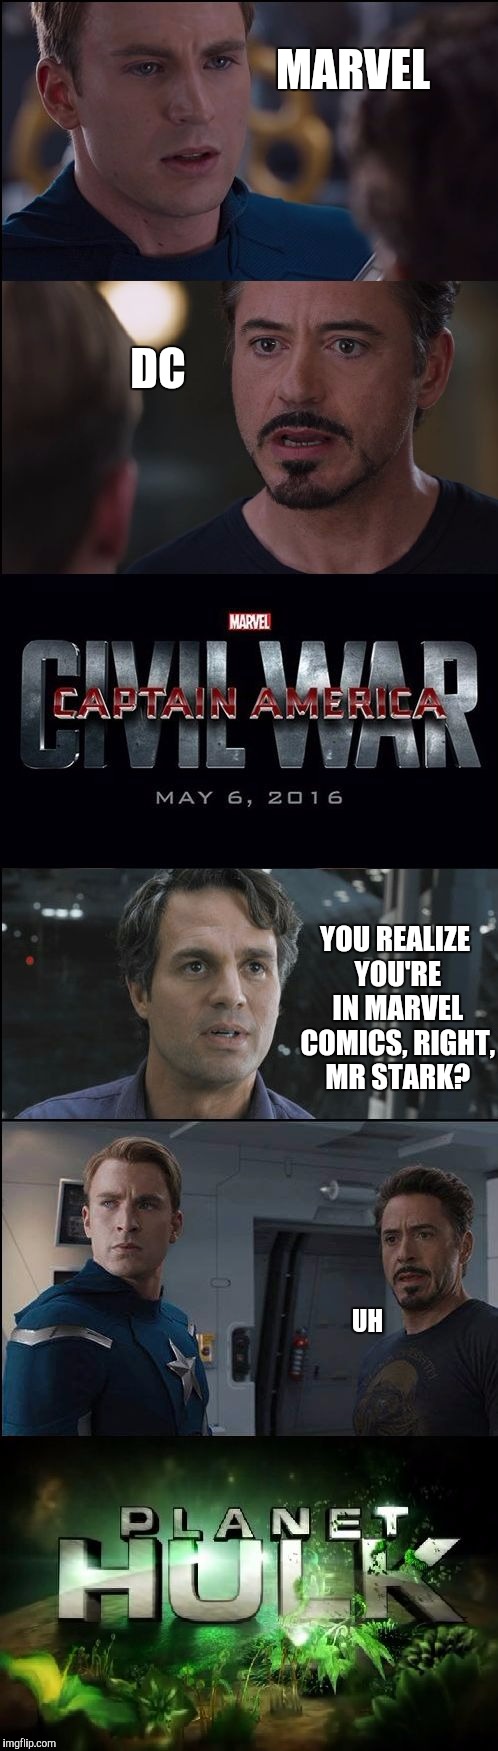 Not with a new superhero ending, but with a plot twist :) |  MARVEL; DC; YOU REALIZE YOU'RE IN MARVEL COMICS, RIGHT, MR STARK? UH | image tagged in civil war/planet hulk,memes,funny | made w/ Imgflip meme maker